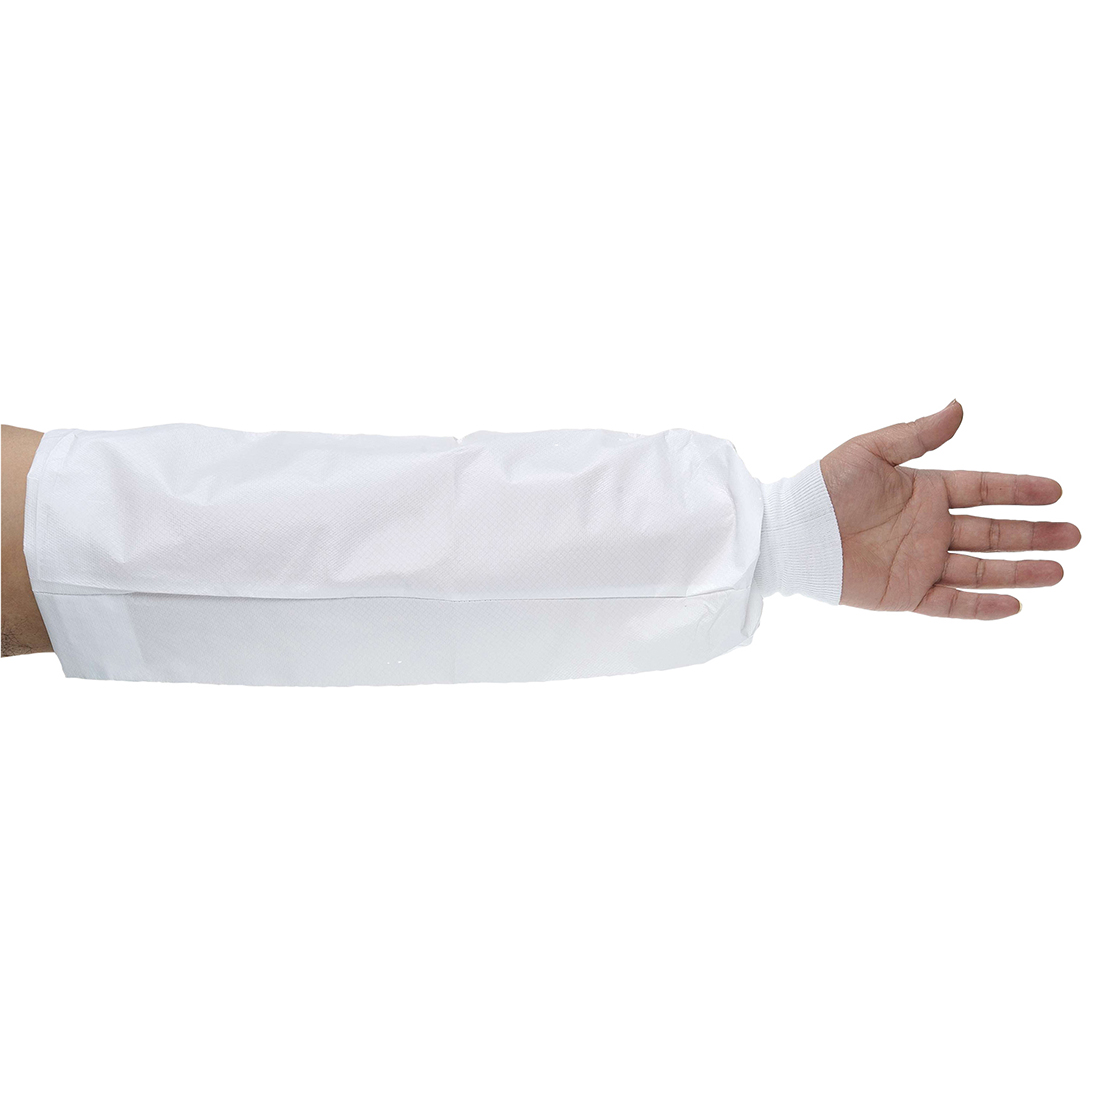 BizTex Microporous Sleeve with Knitted Cuff Type PB[6] - White